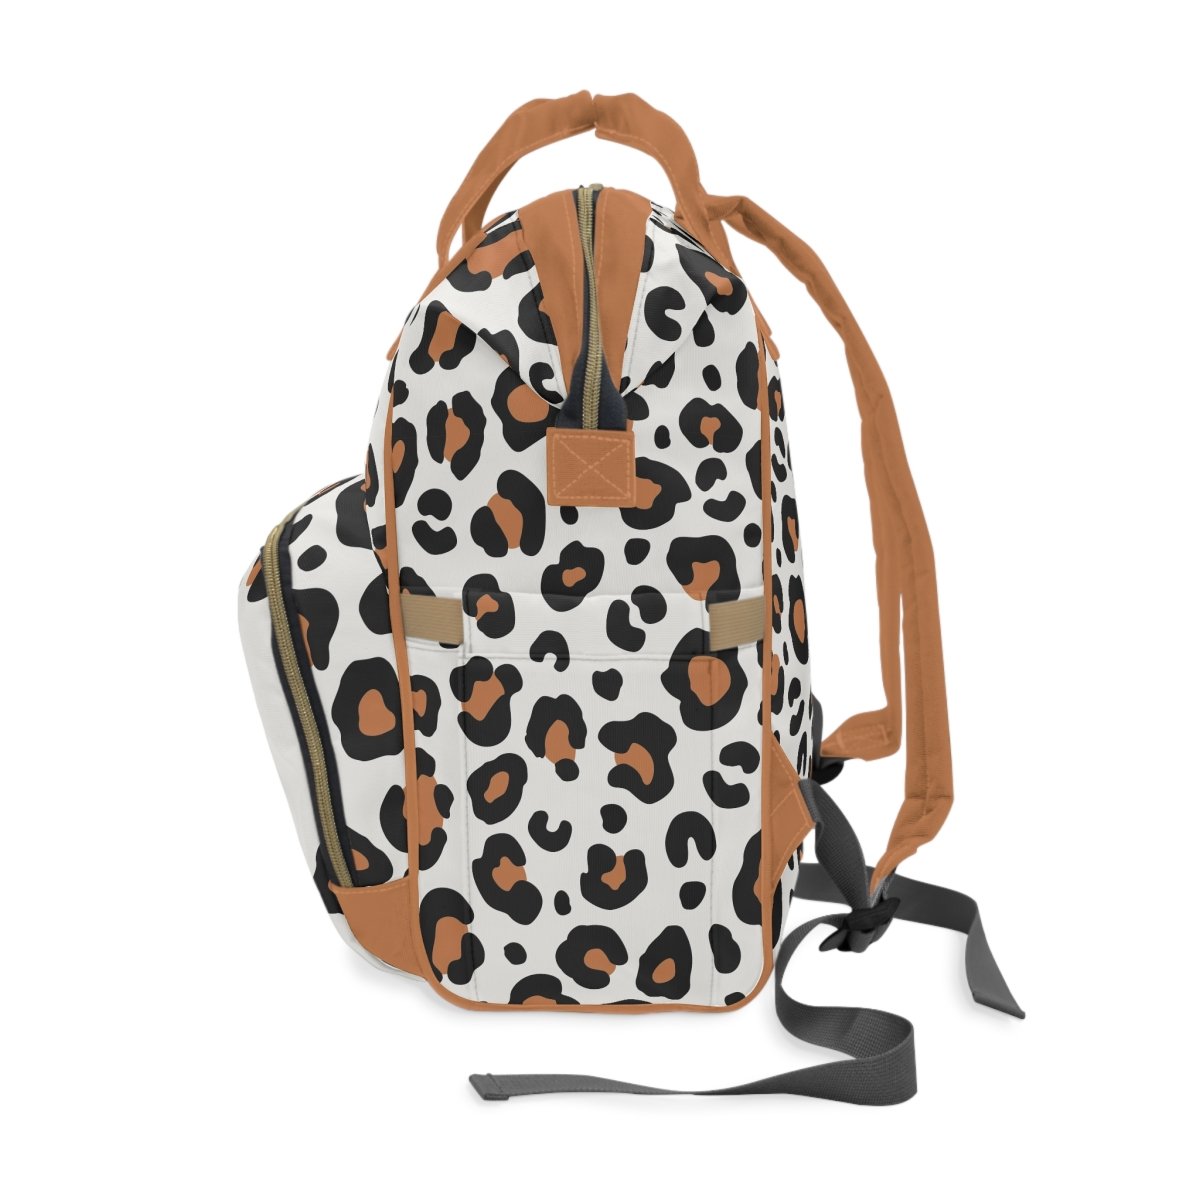 Luxe Leopard Personalized Backpack Diaper Bag - Backpack